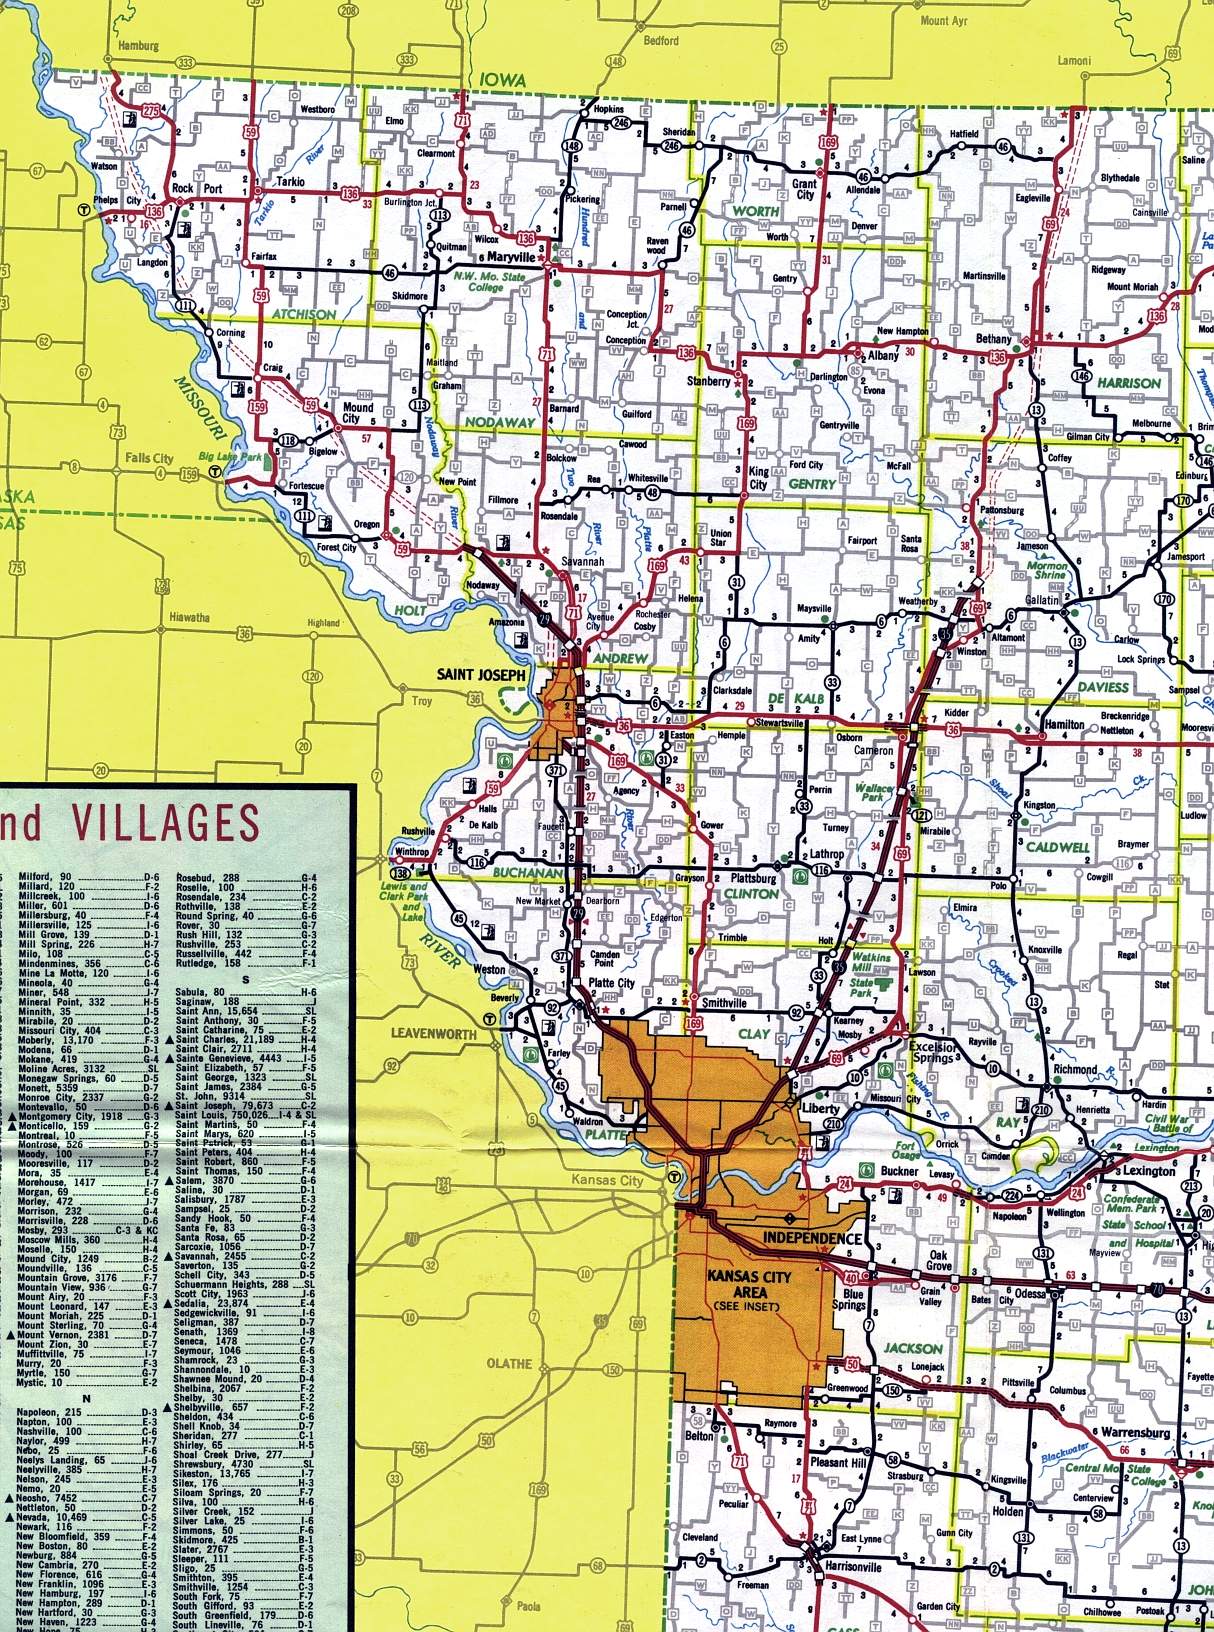 Northwest corner of Missouri from 1969 official highway map